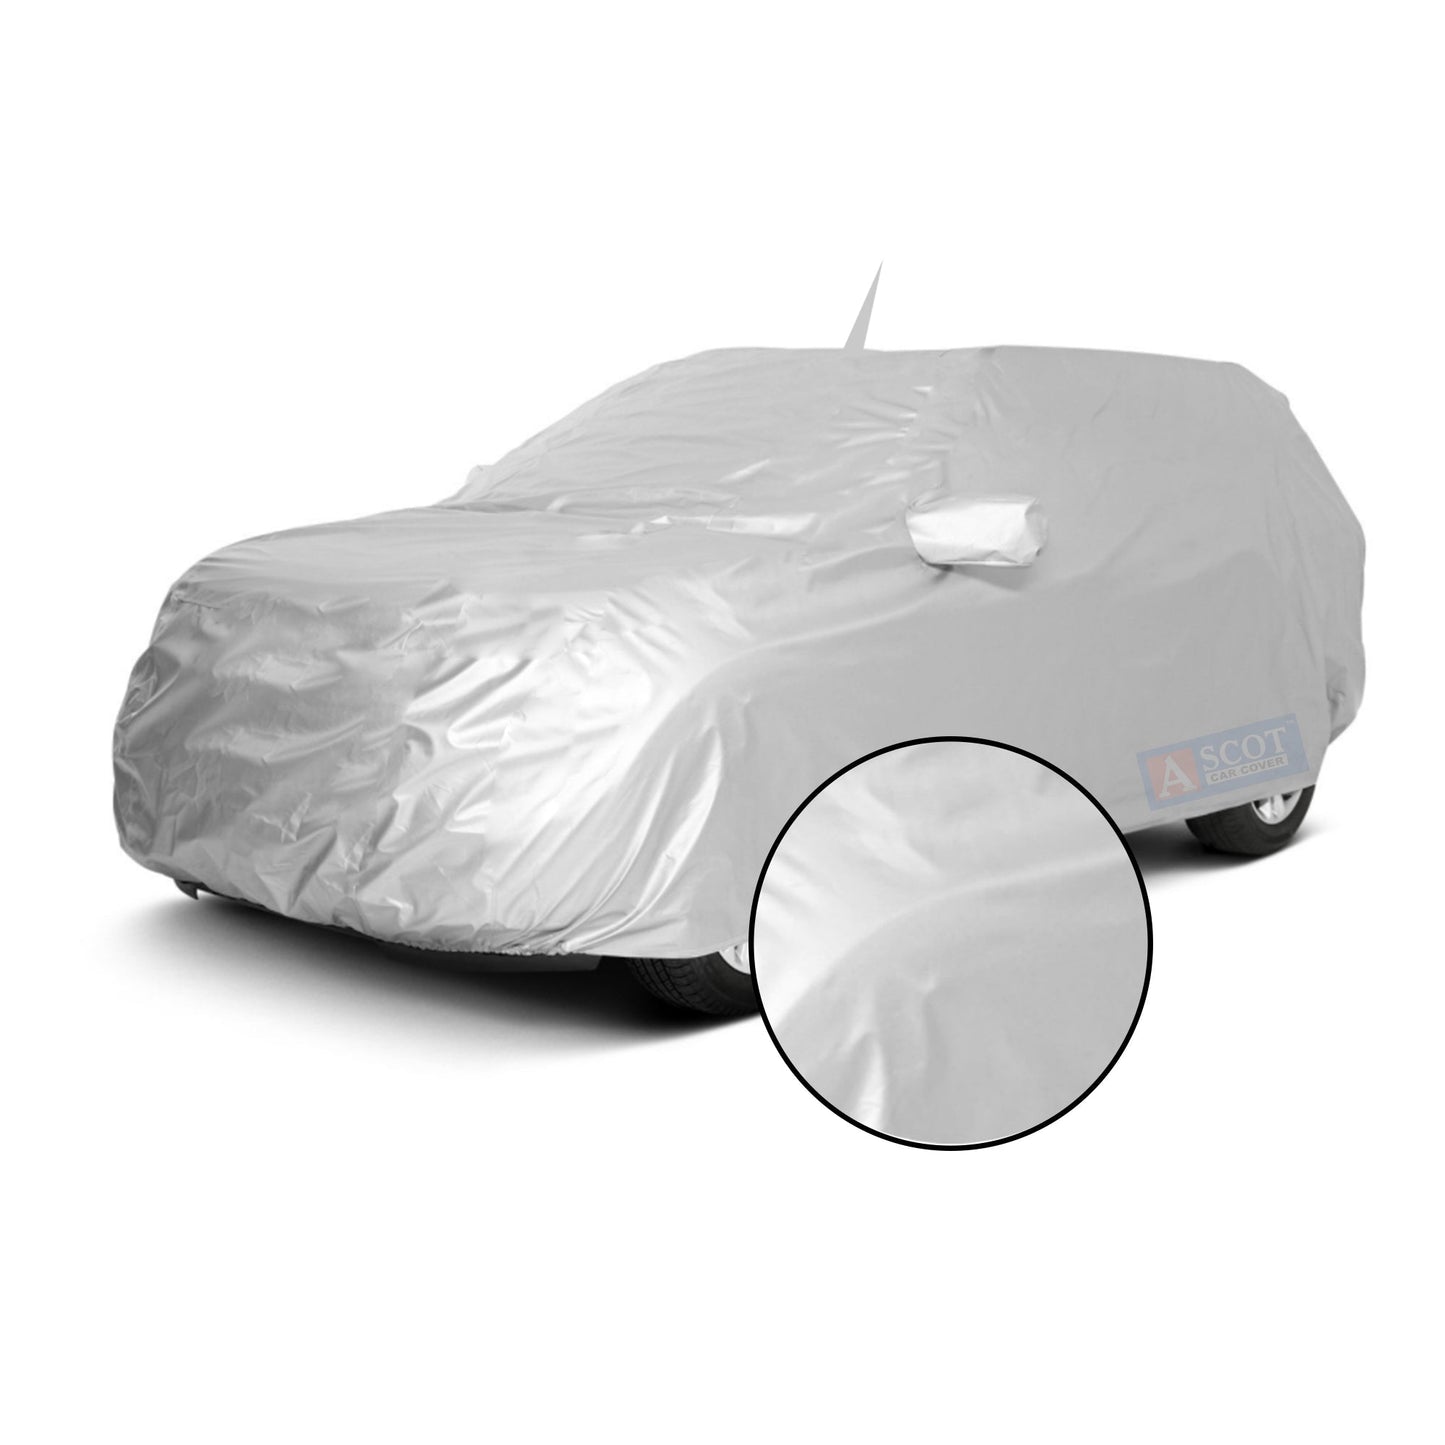 Ascot MG Hector / Hector Facelift Car Body Cover Dust Proof, Trippel Stitched